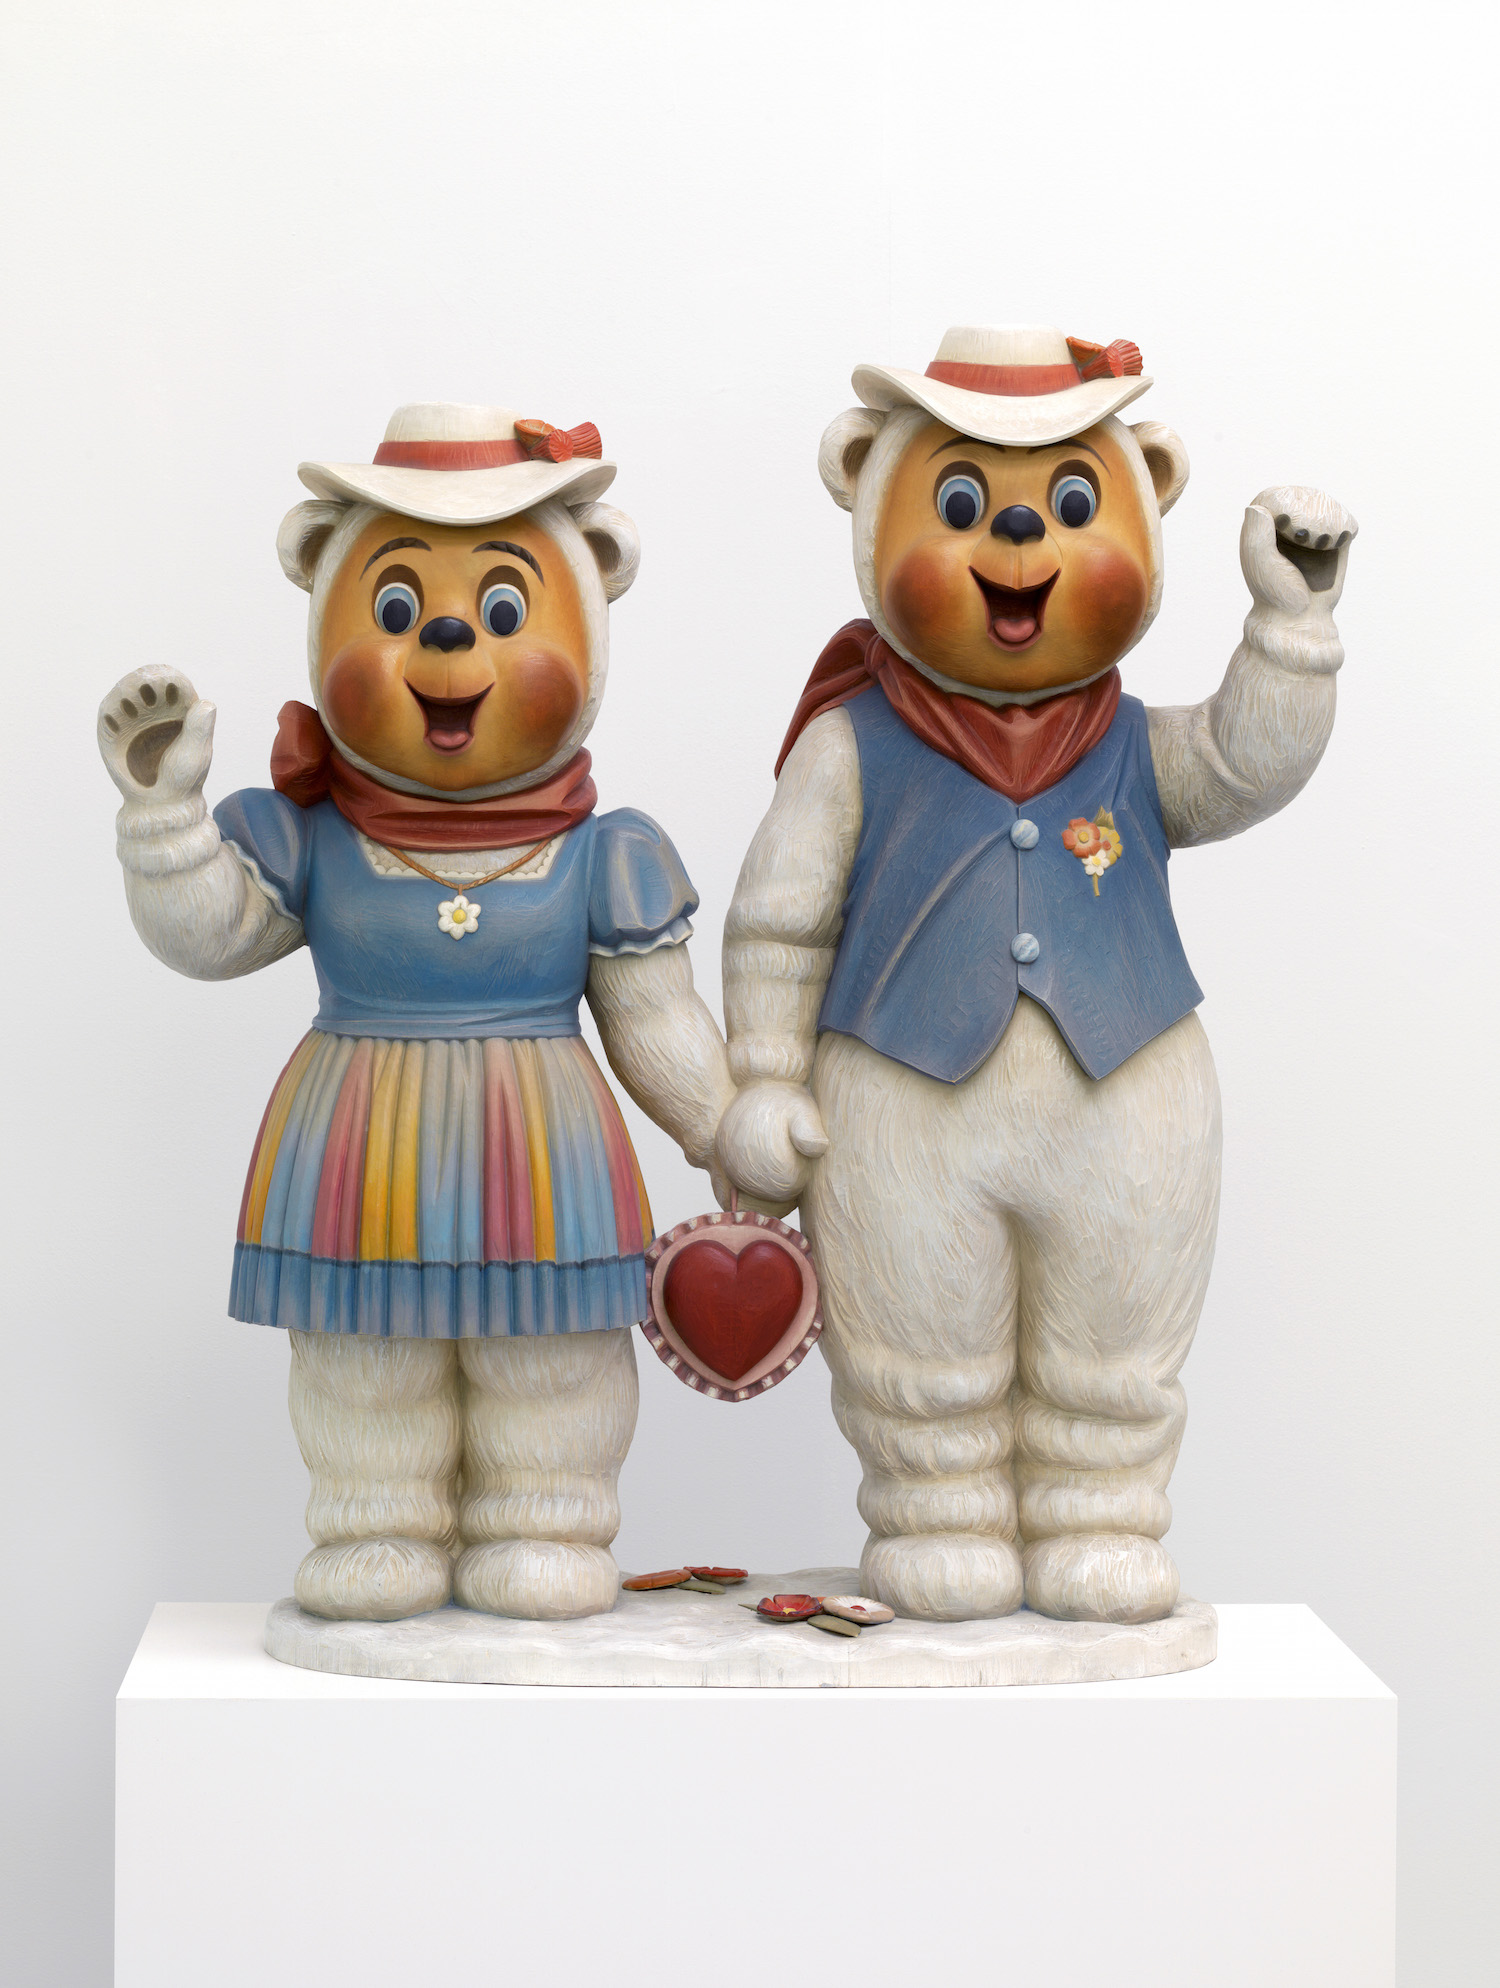 Jeff Koons, Winter Bears, 1988. Artist Rooms, Tate and National Galleries of Scotland. Acquired jointly through The d'Offay Donation with assistance from the National Heritage Memorial Fund and the Art Fund 2008, © Jeff Koons. Image courtesy Norwich Castle Museum and Art Gallery